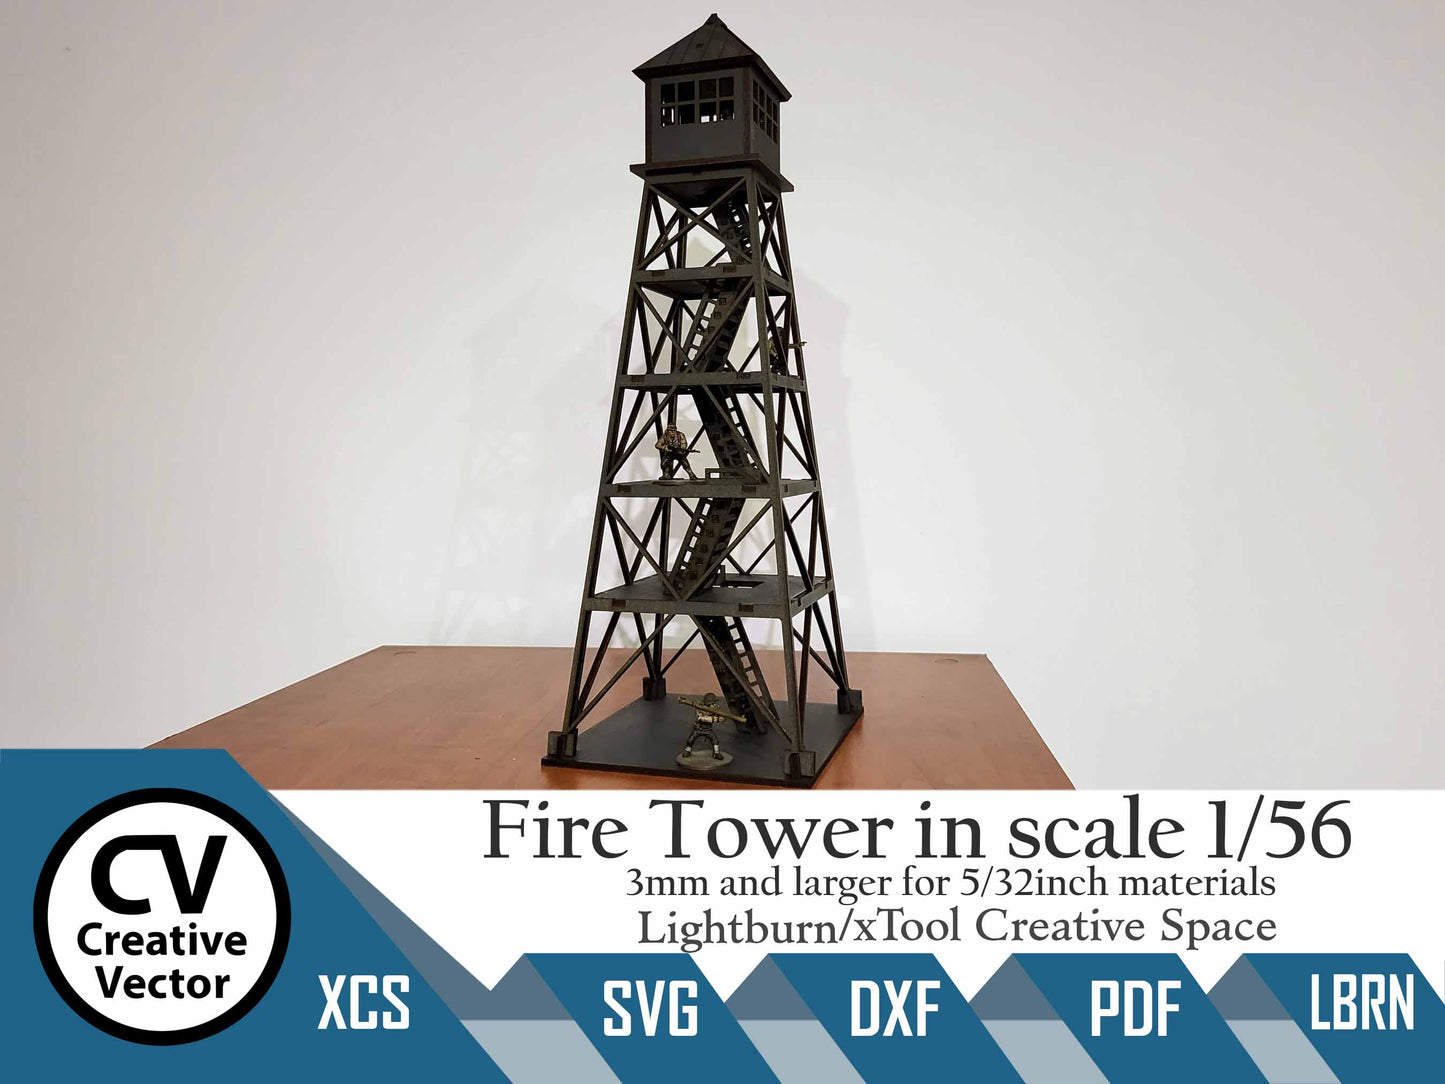 Fire Tower in scale 1/56